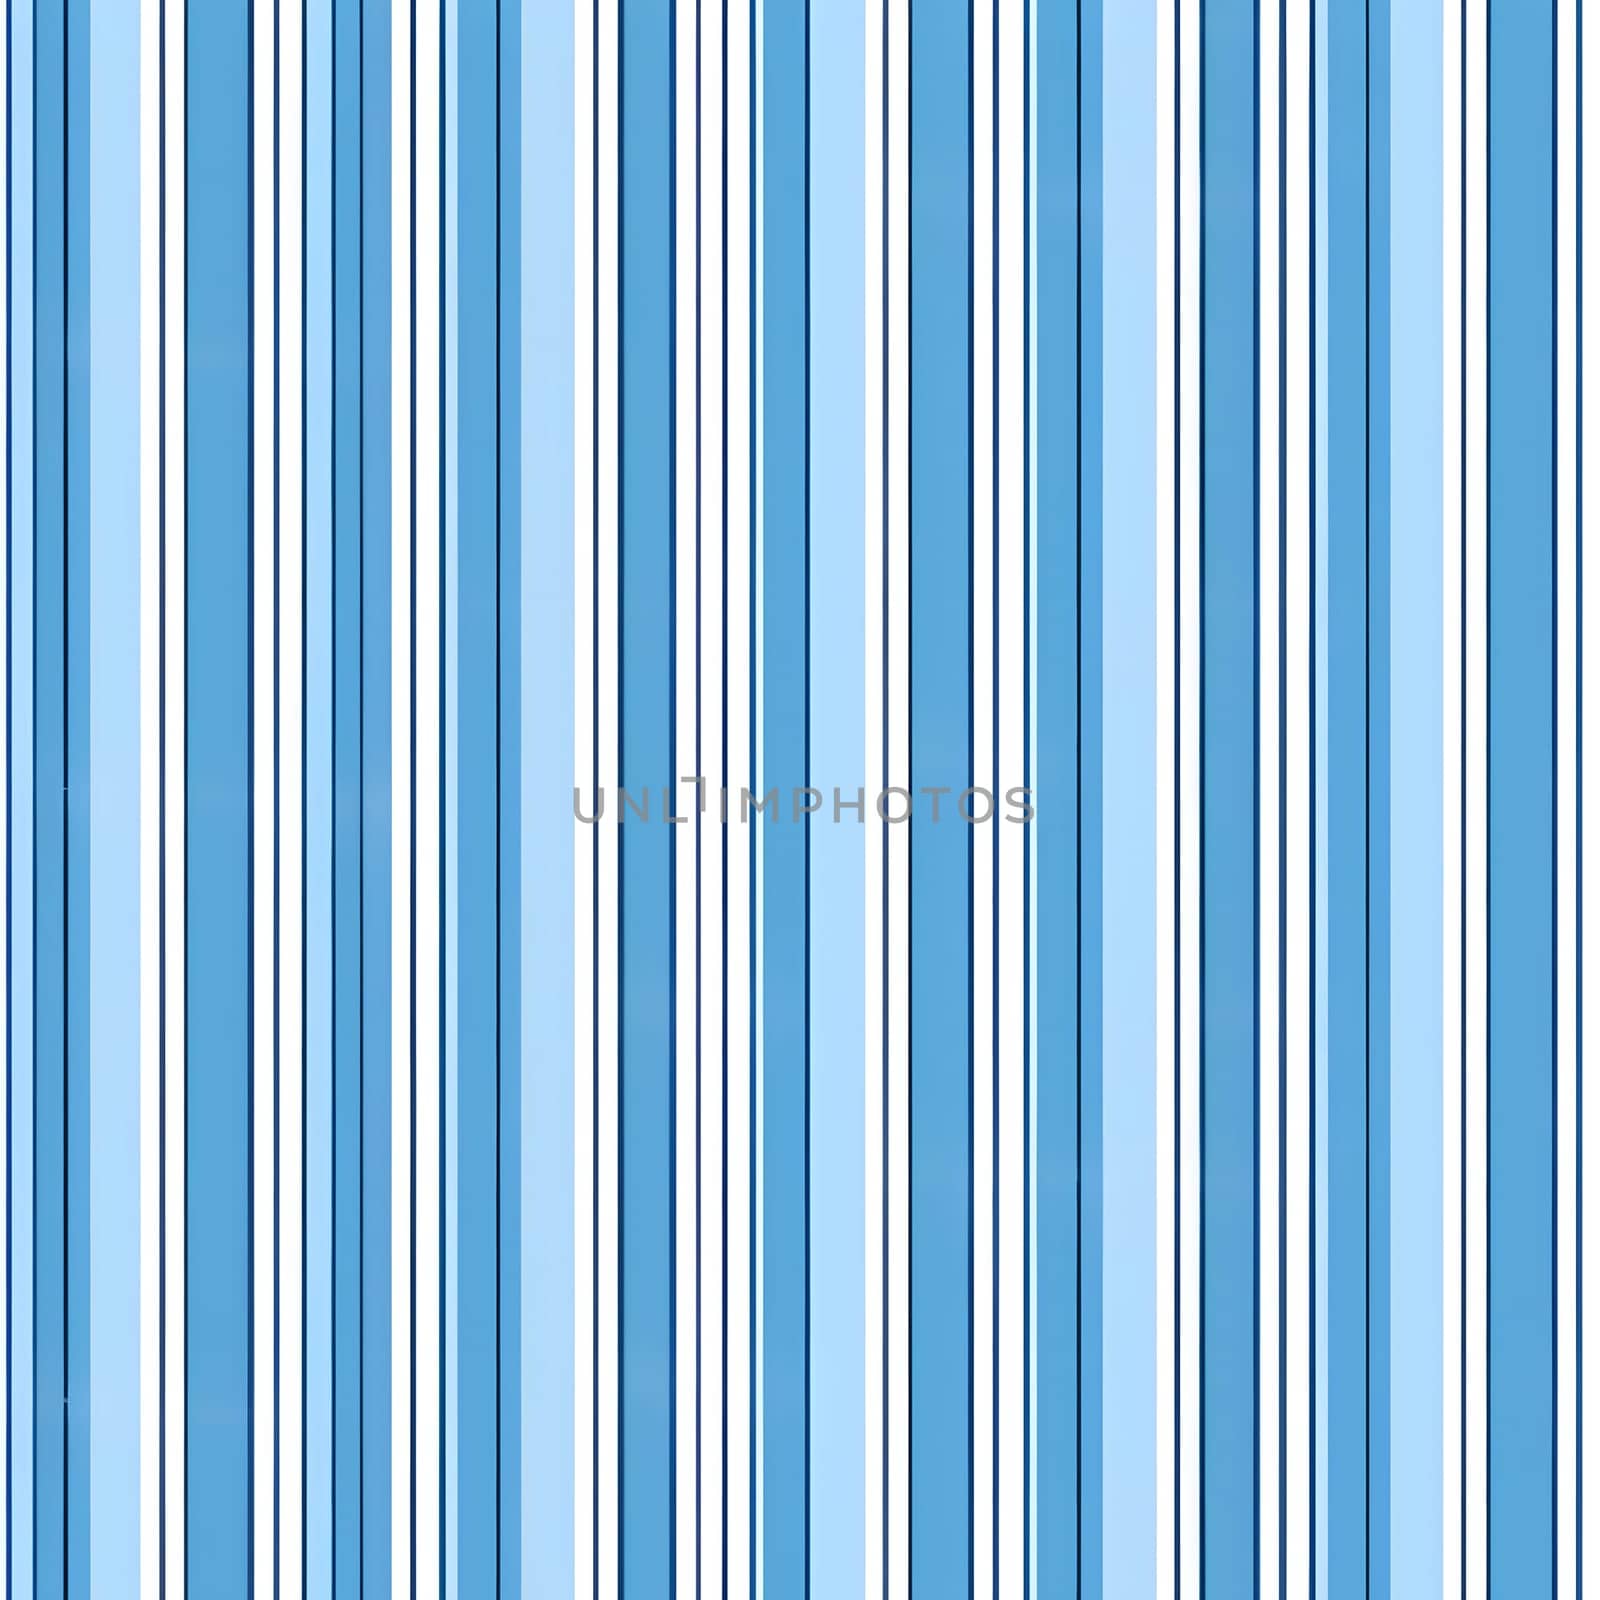 Patterns and banners backgrounds: Vertical stripes seamless pattern background suitable for fashion textiles, graphics